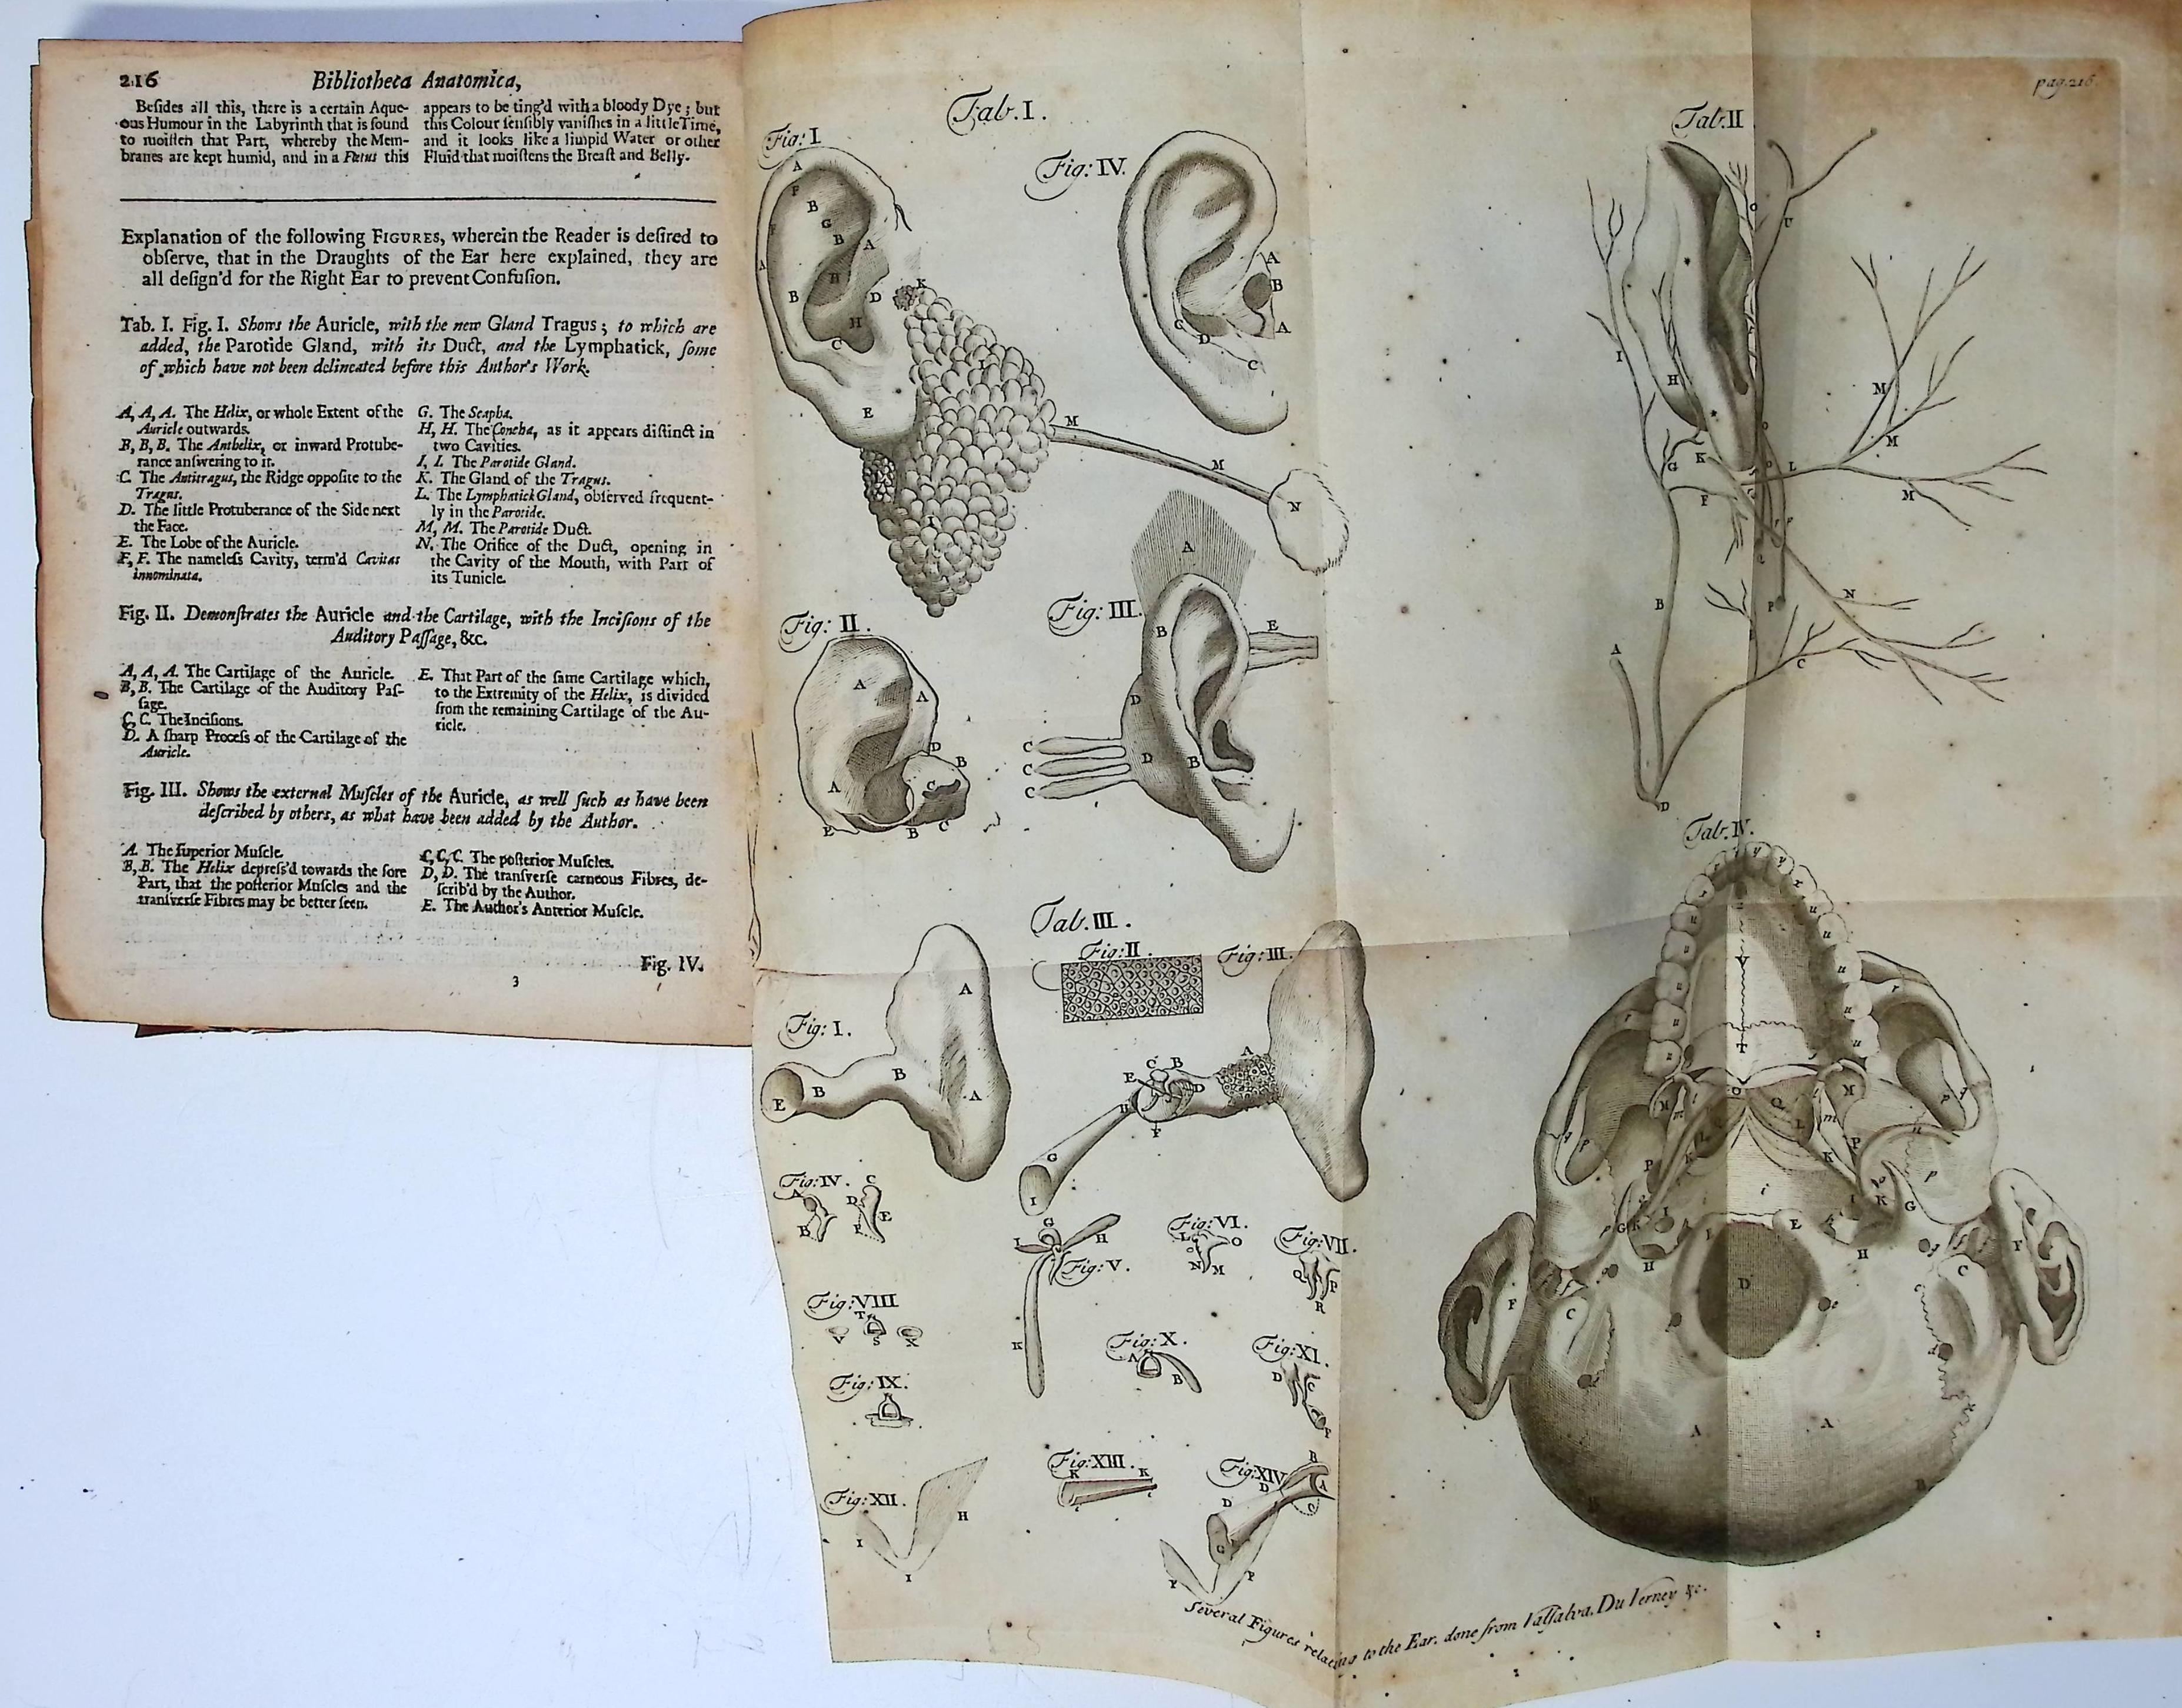 Bibliotheca Anatomica, Medica, Chirurgica, &c. Containing a Description of the Several Parts of the Body Each Done by Some One of More Eminent Physician or Chirurgeon; with their Disease and Cures. Volume 2 [of 3].